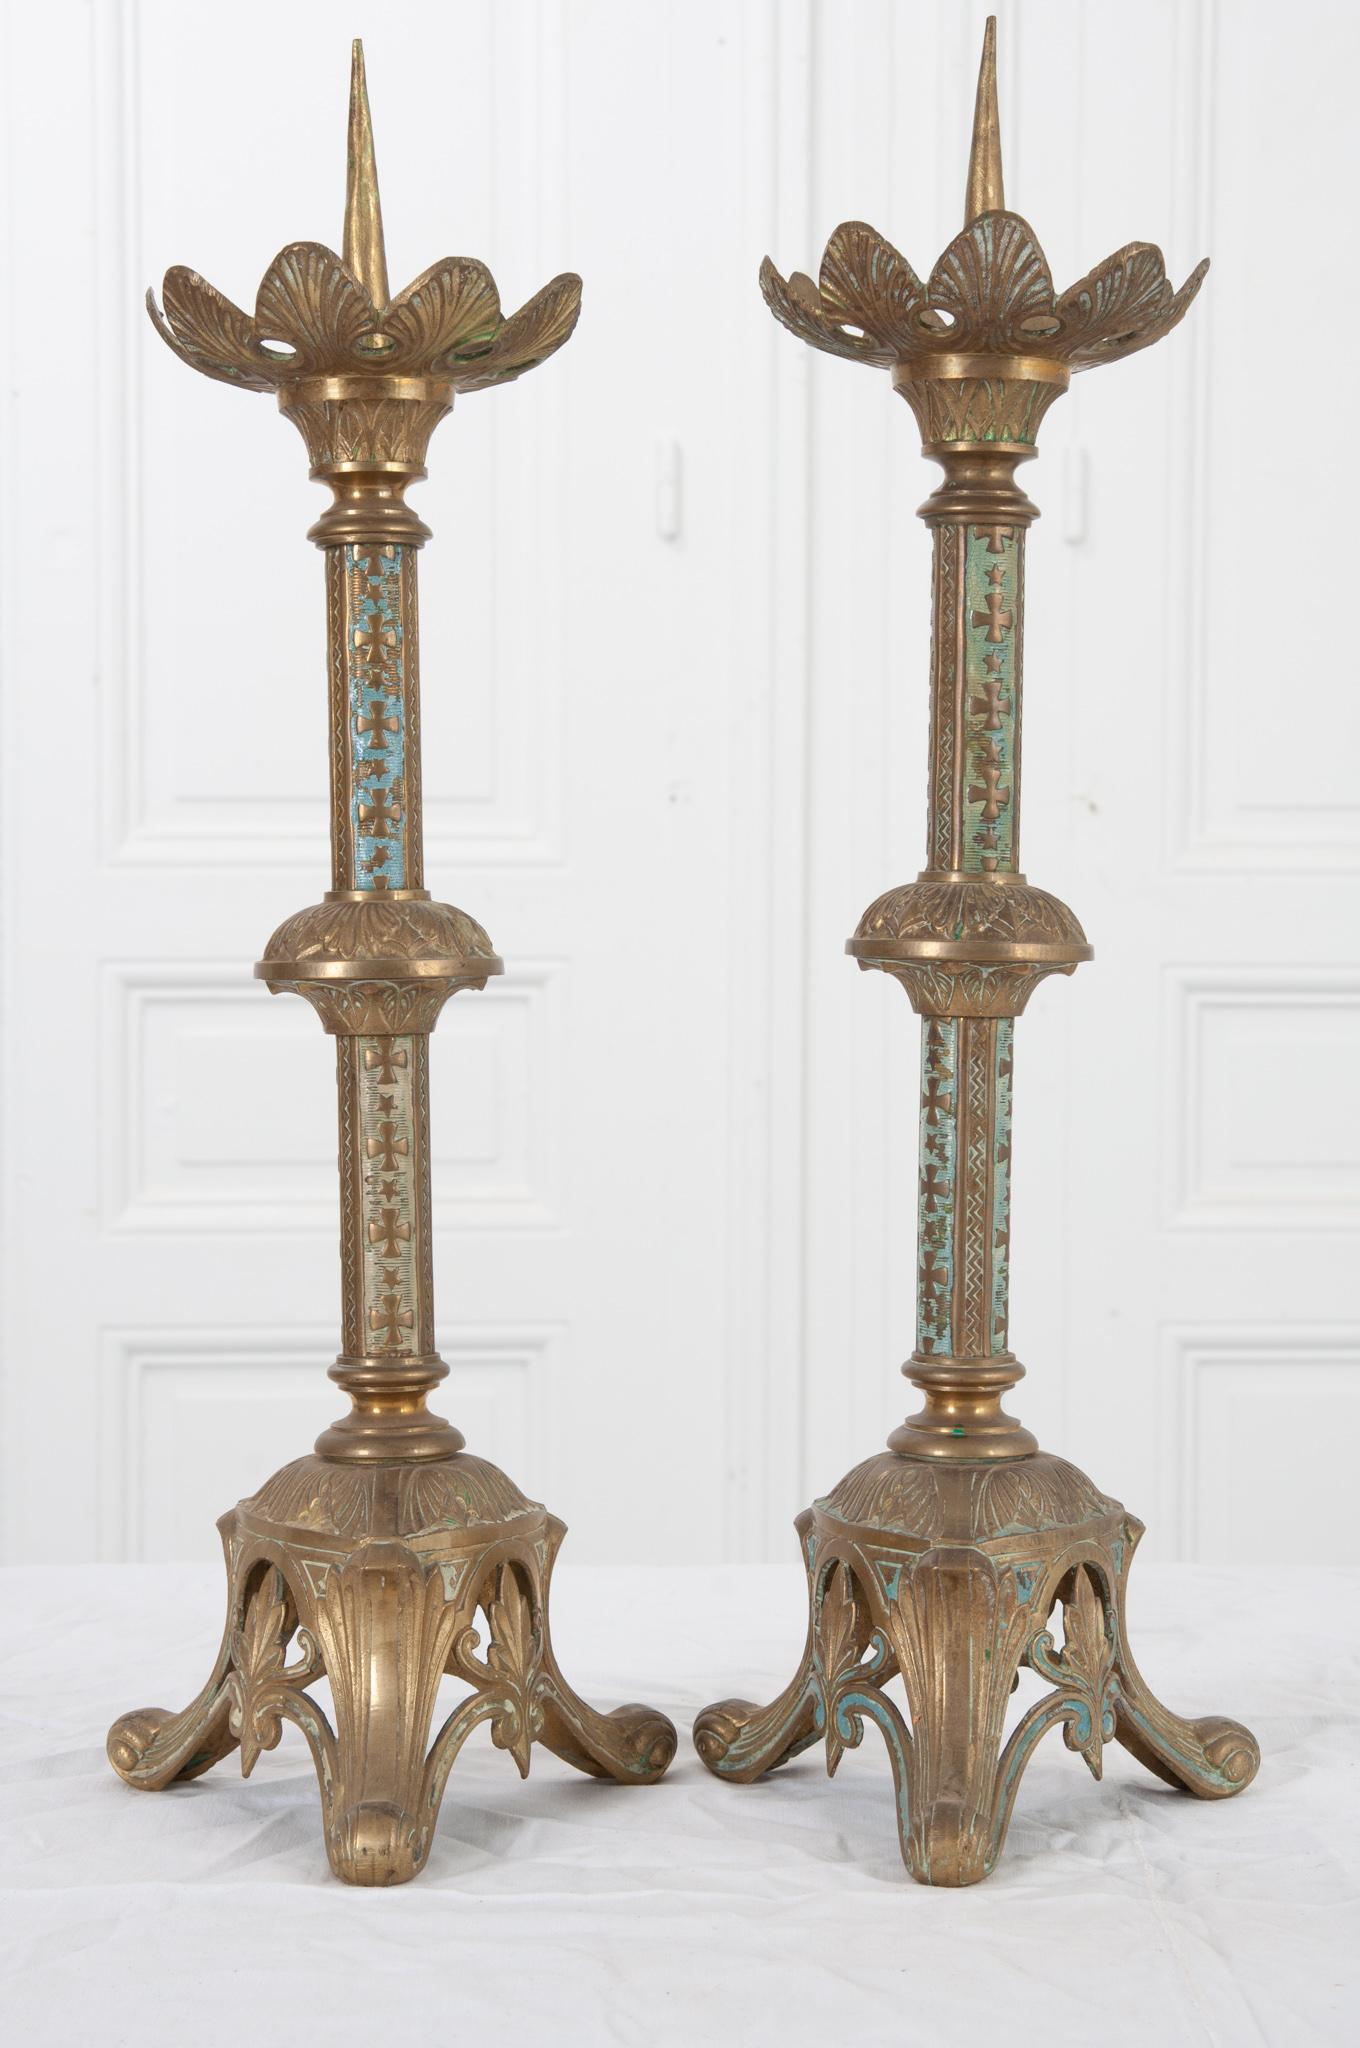 This stunning pair of candlesticks were made in 19th century France and most likely used for religious purposes for many years. Fantastic details throughout include stunning pierced brass tripod feet, crosses and stars, and detailed leaves. Hints of